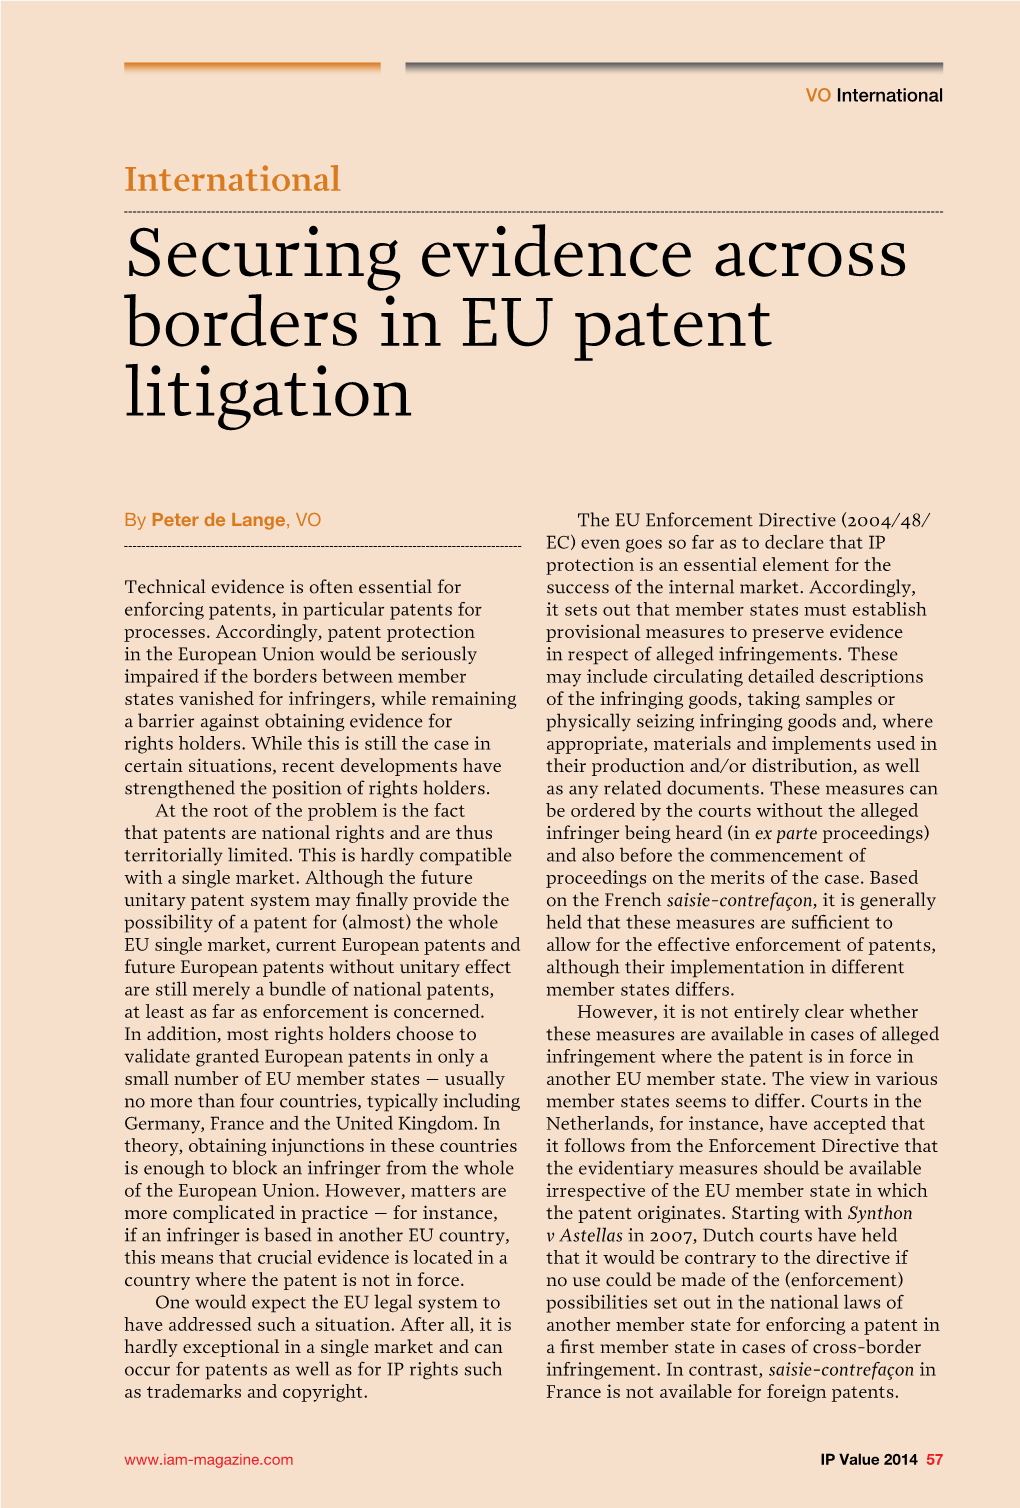 Securing Evidence Across Borders in EU Patent Litigation